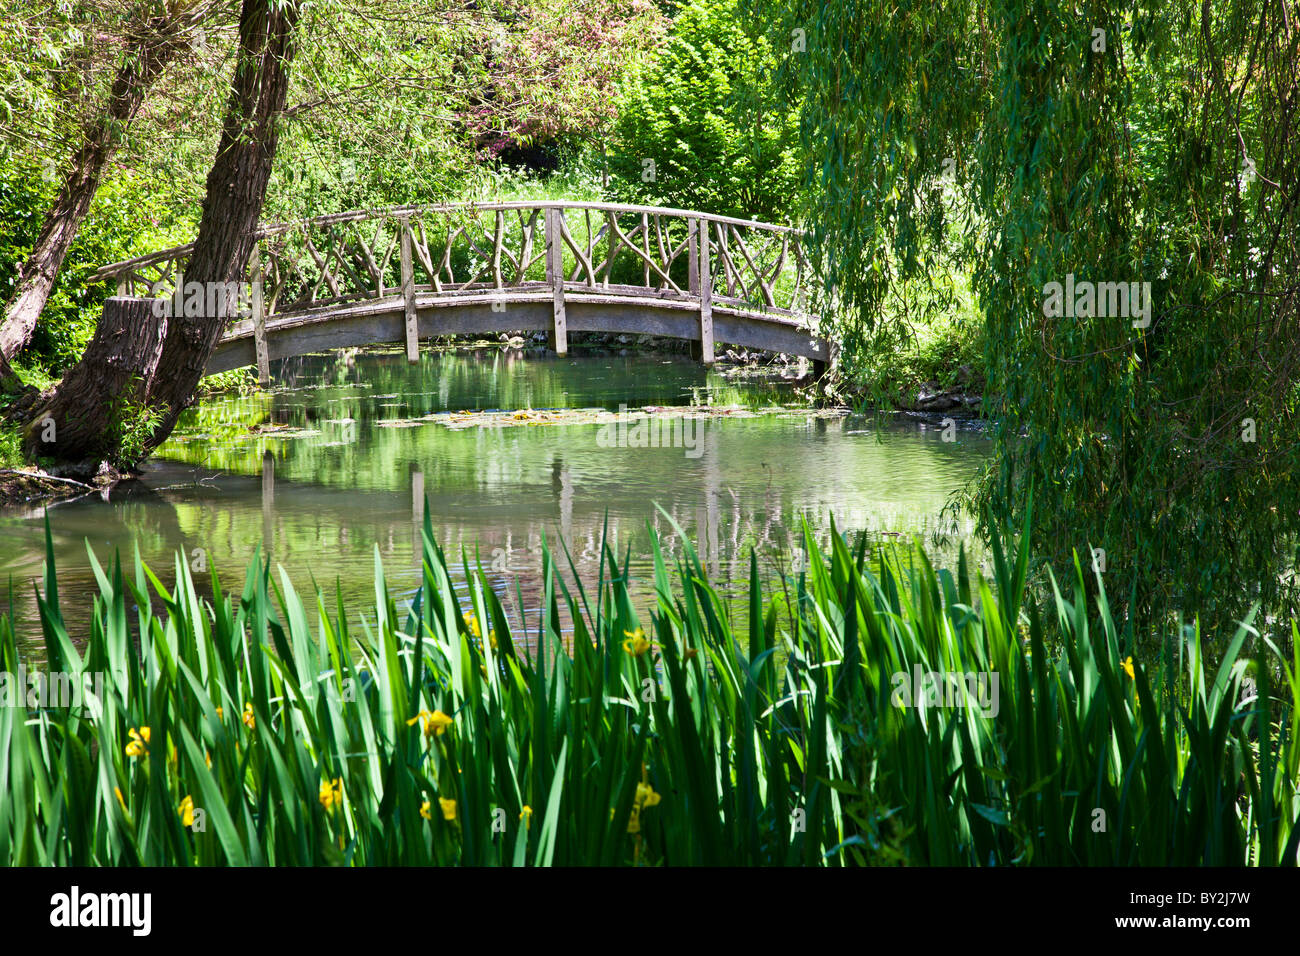 A large ornamental pond or small lake with a pretty rustic wooden bridge in an English country garden in summer Stock Photo